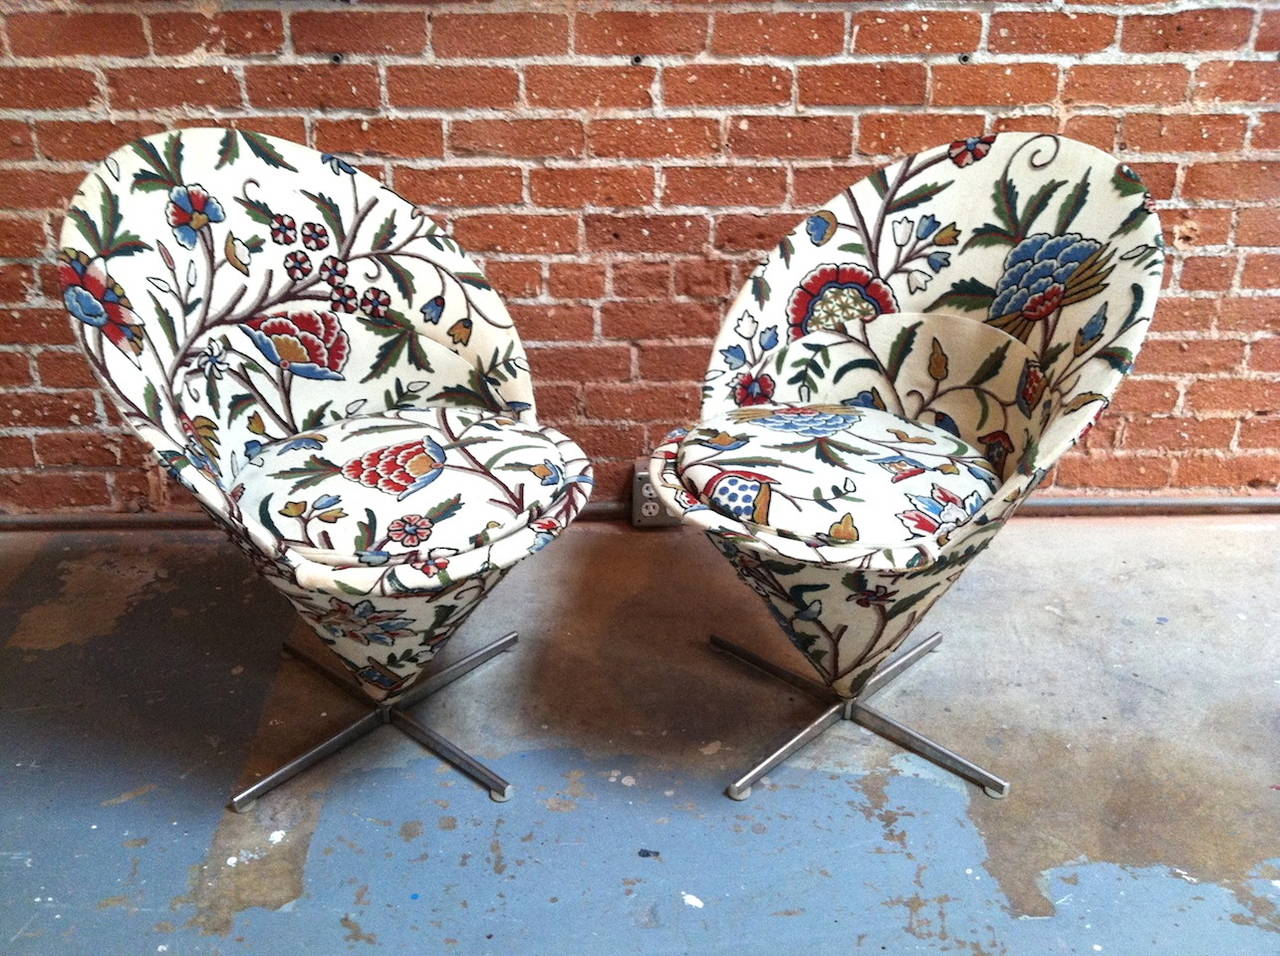 Pair of early Verner Panton cone chairs. Marked made in Denmark inside seats. Sold in as found condition for re-upholstery.